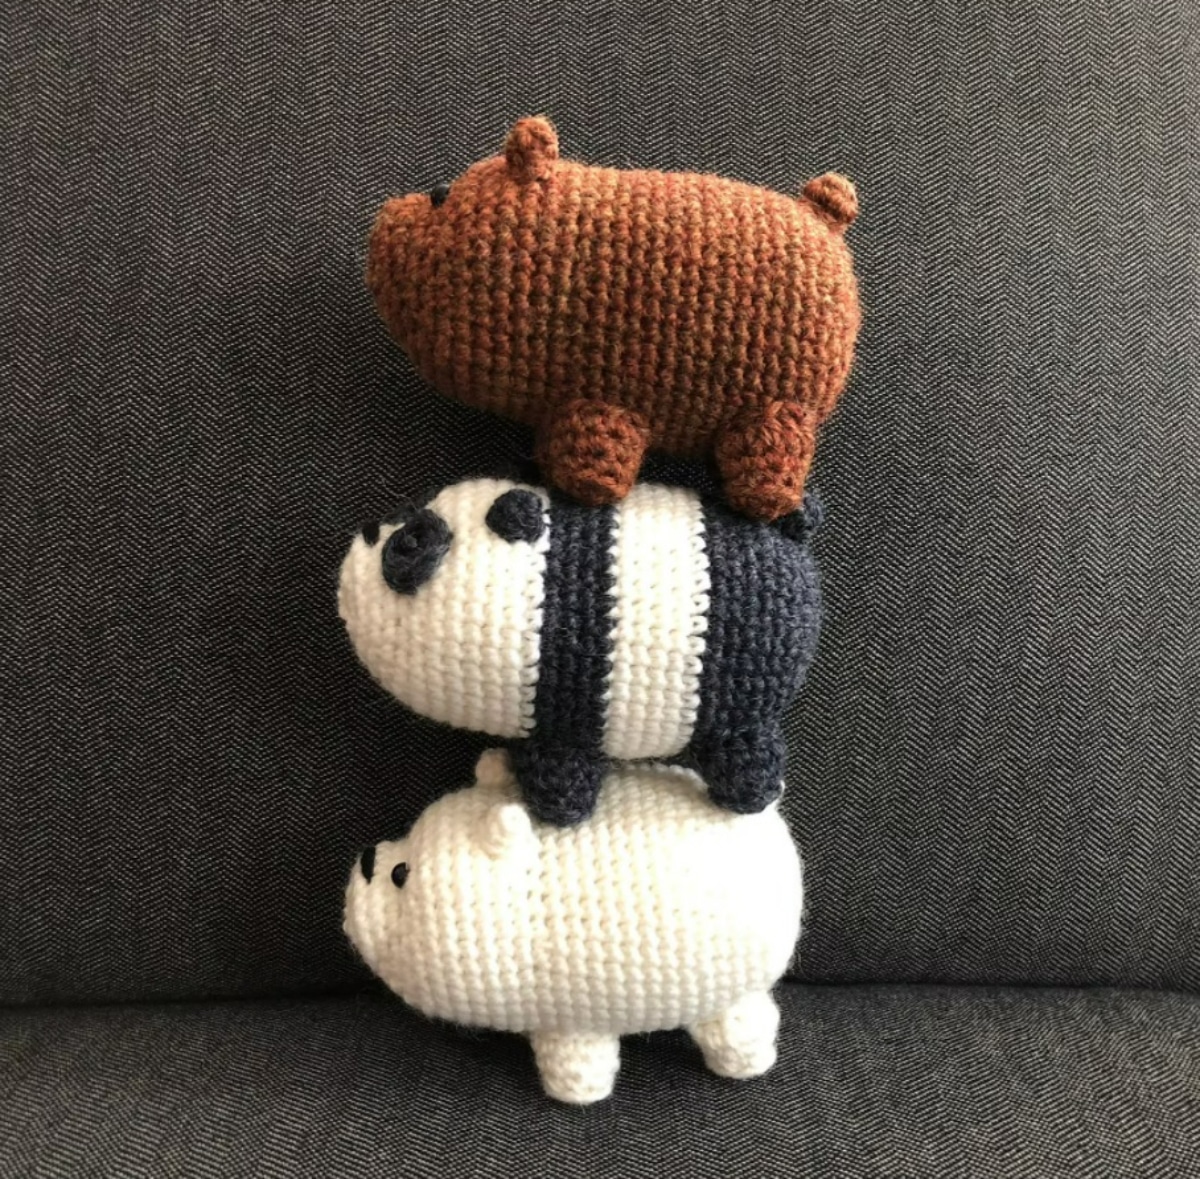 Three crochet bears stacked on top of eachother. A white bear, black and white bear, and brown bear on a gray sofa.